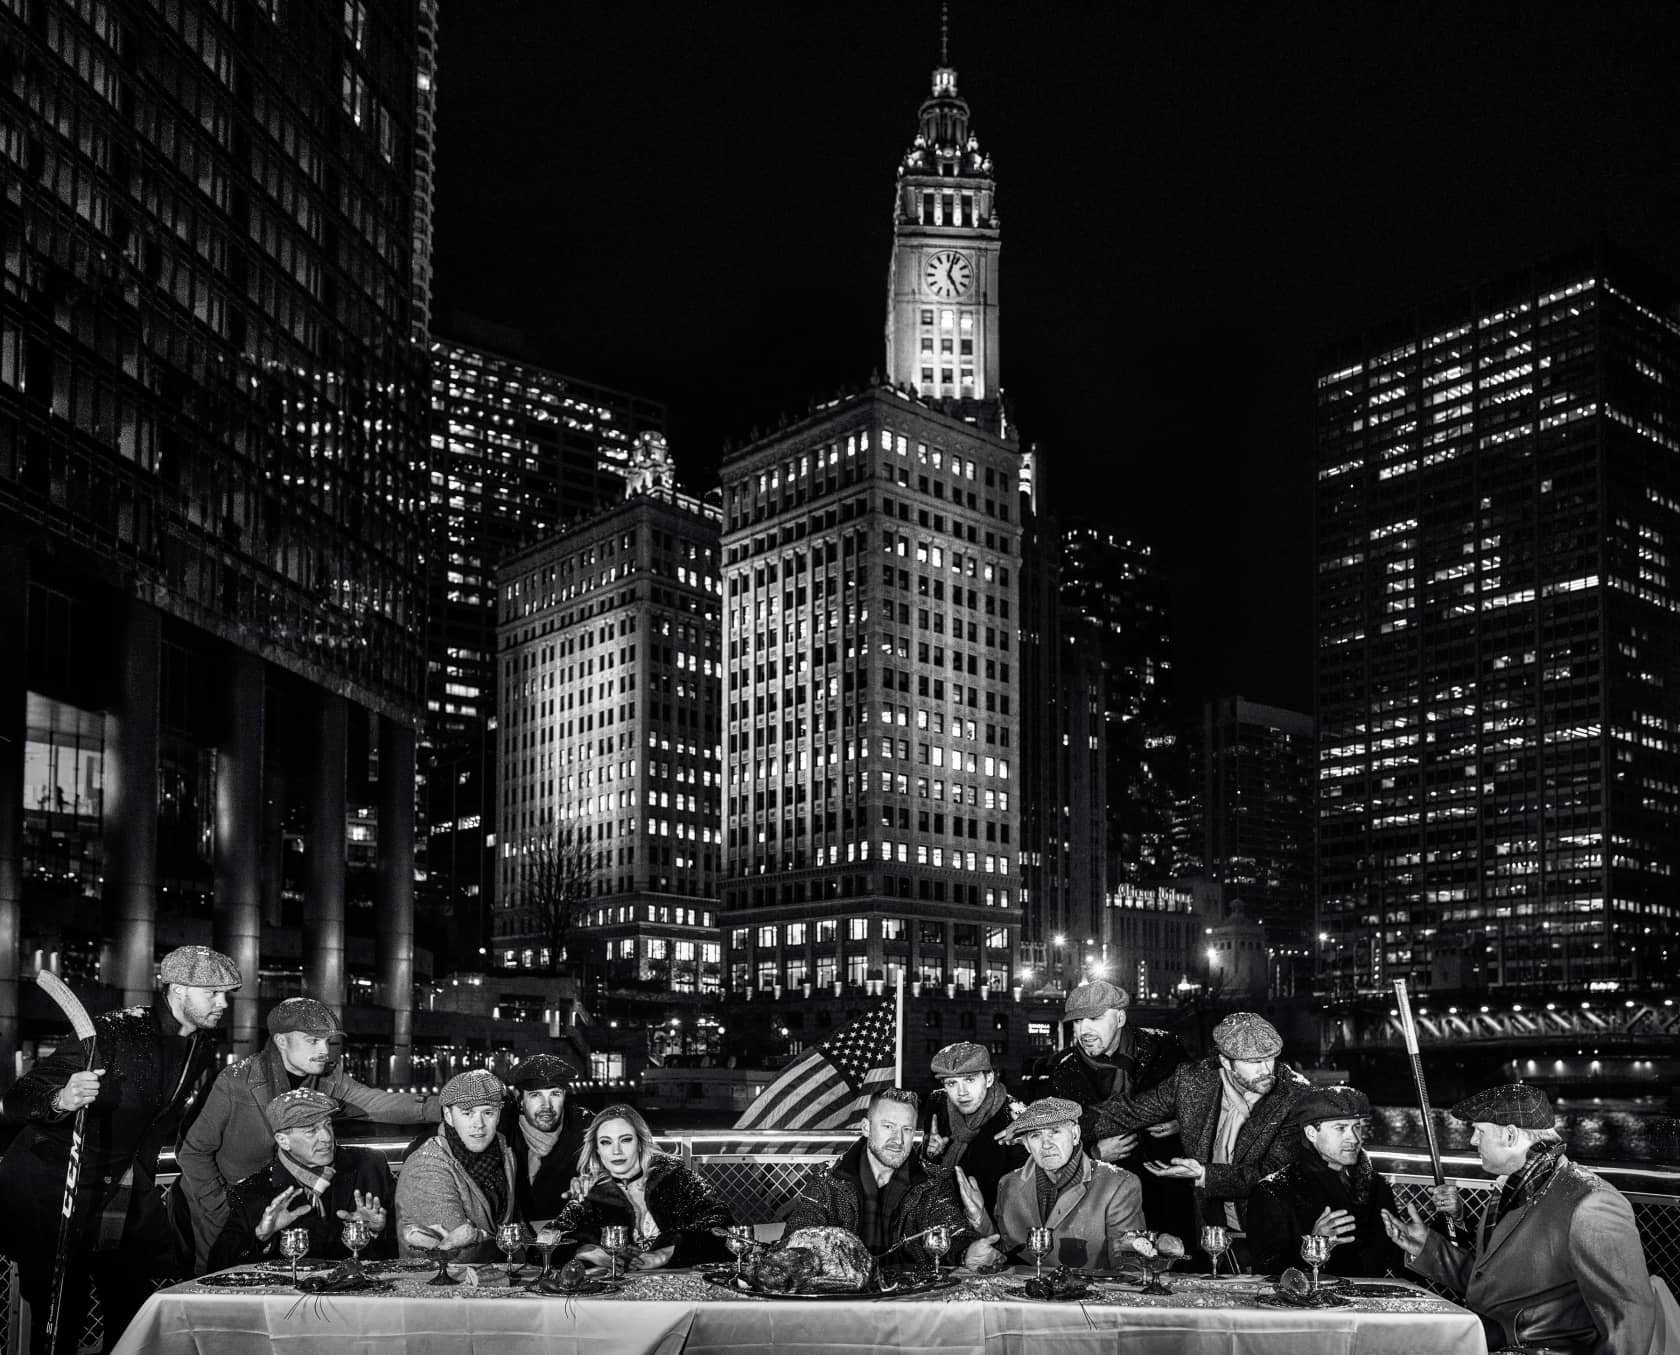 David Yarrow, The Last Supper in Chicago, 2023